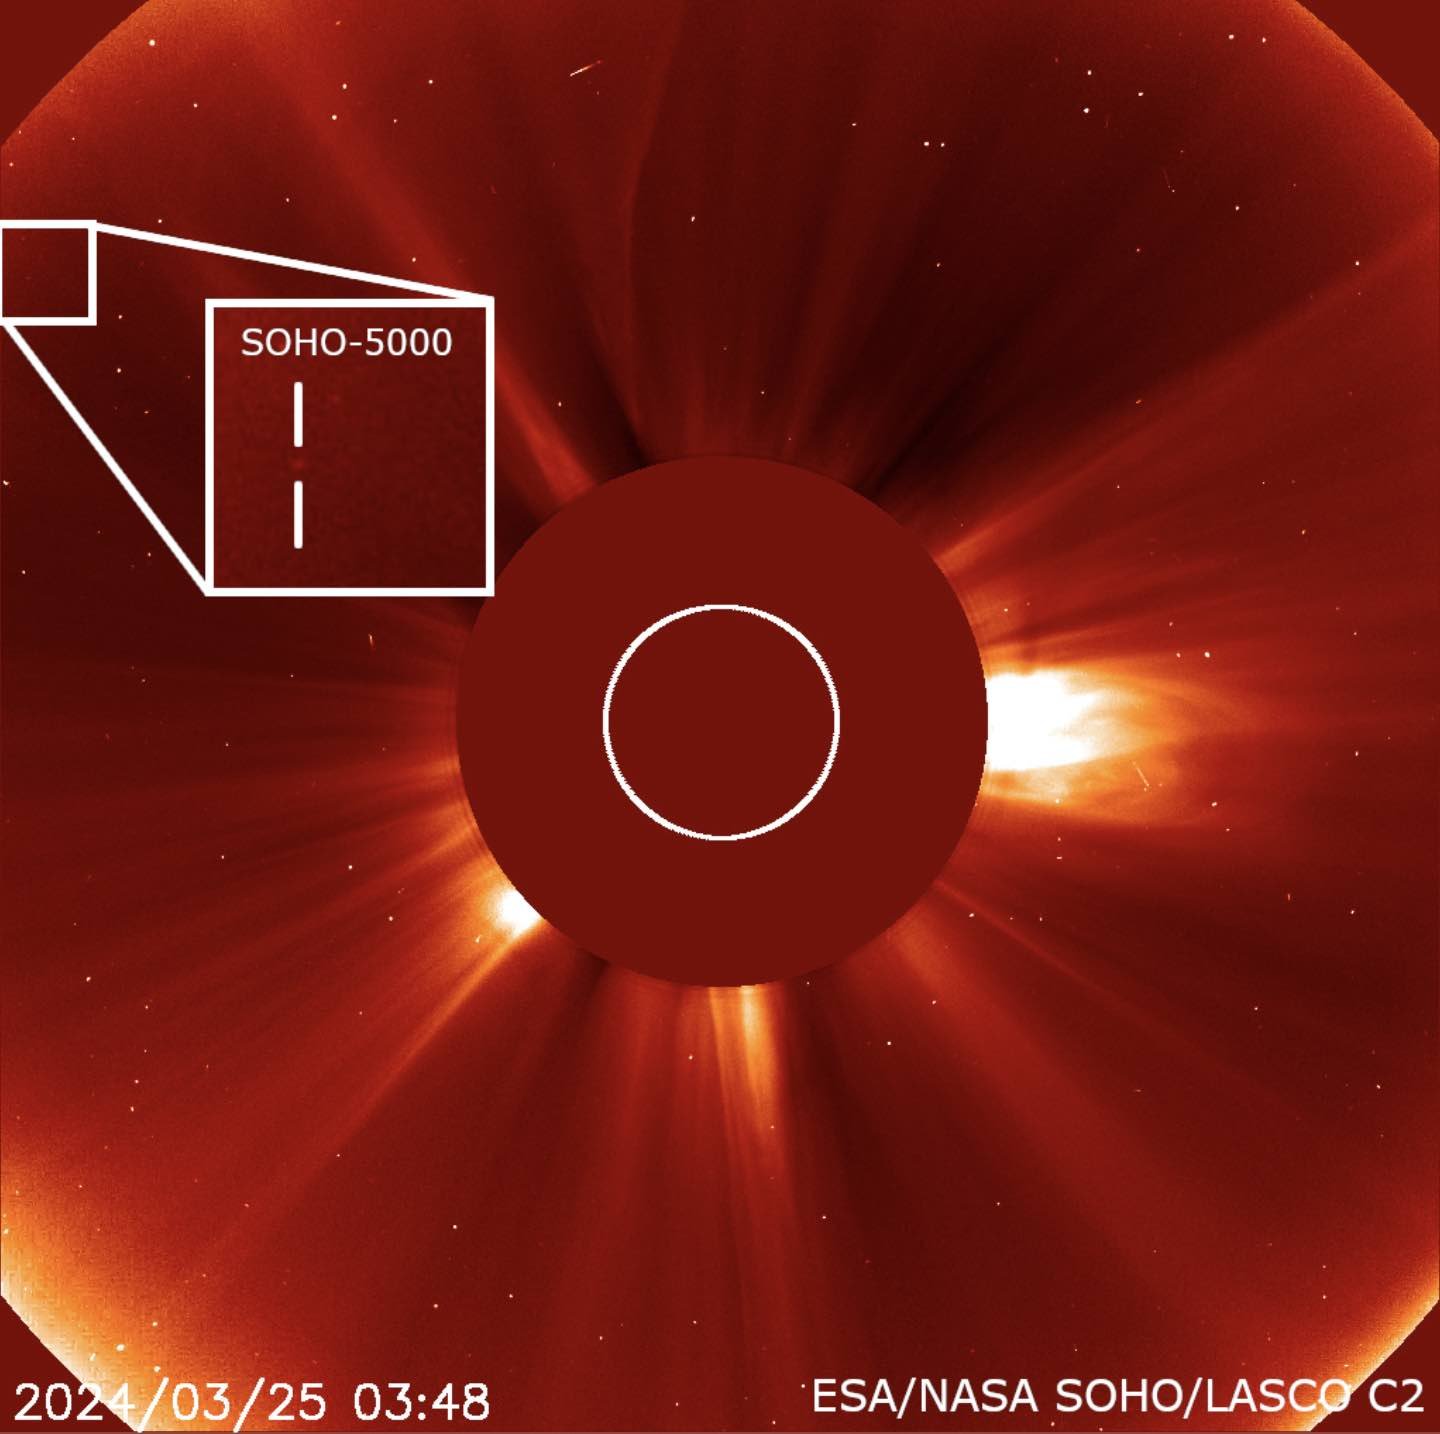 Speeding Space Object Spotted by NASA-Funded Sungrazer Project Marks a Major New Milestone